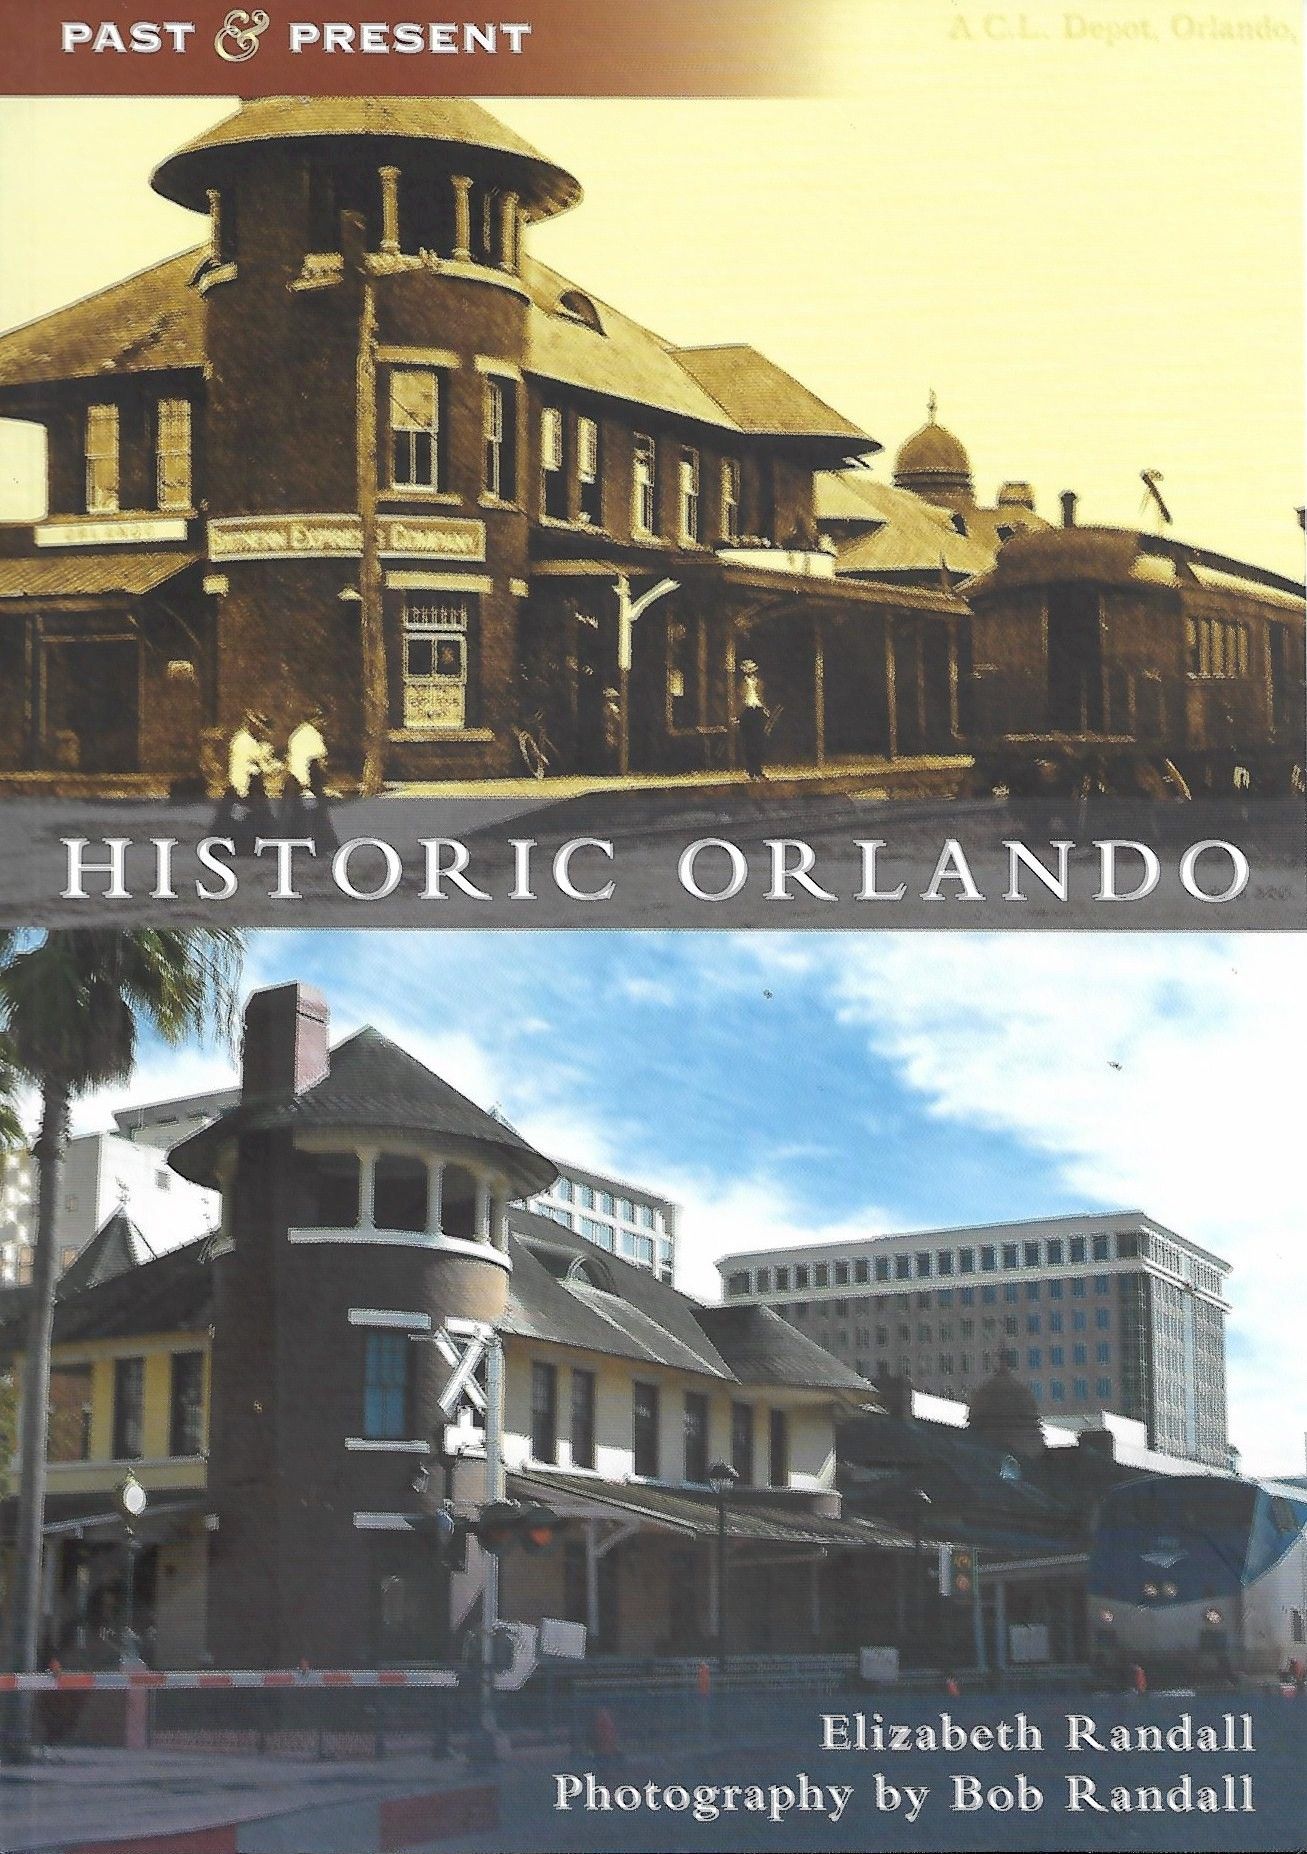 Historic Orlando, a pictorial of the past and present